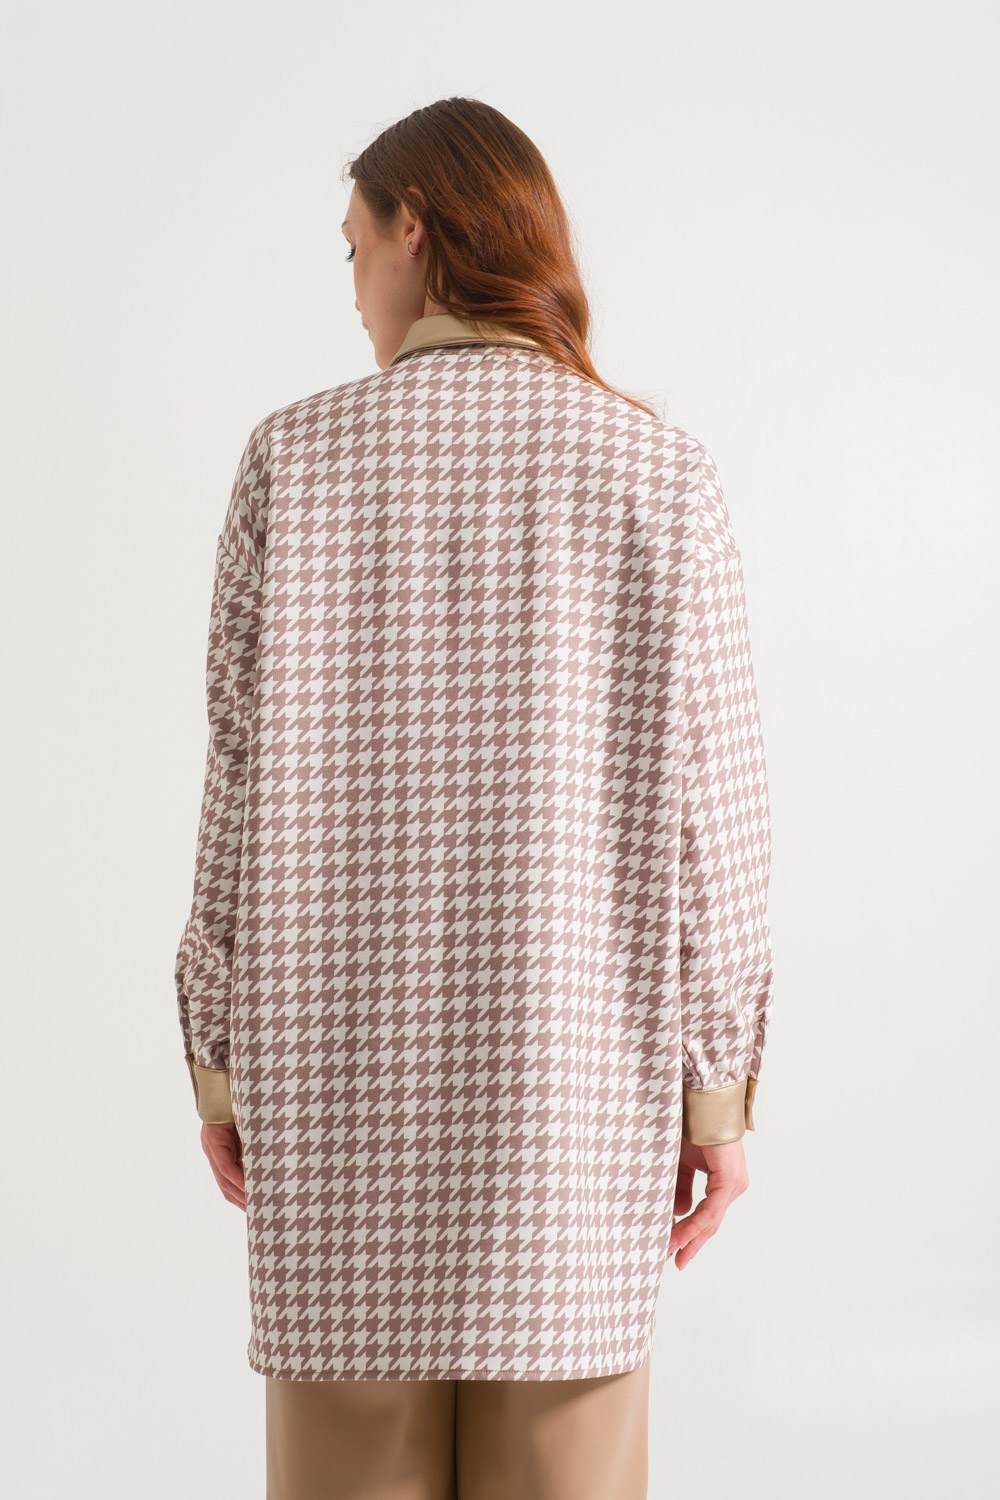 Goosefoot Patterned Beige Tunic with Hidden Buttons